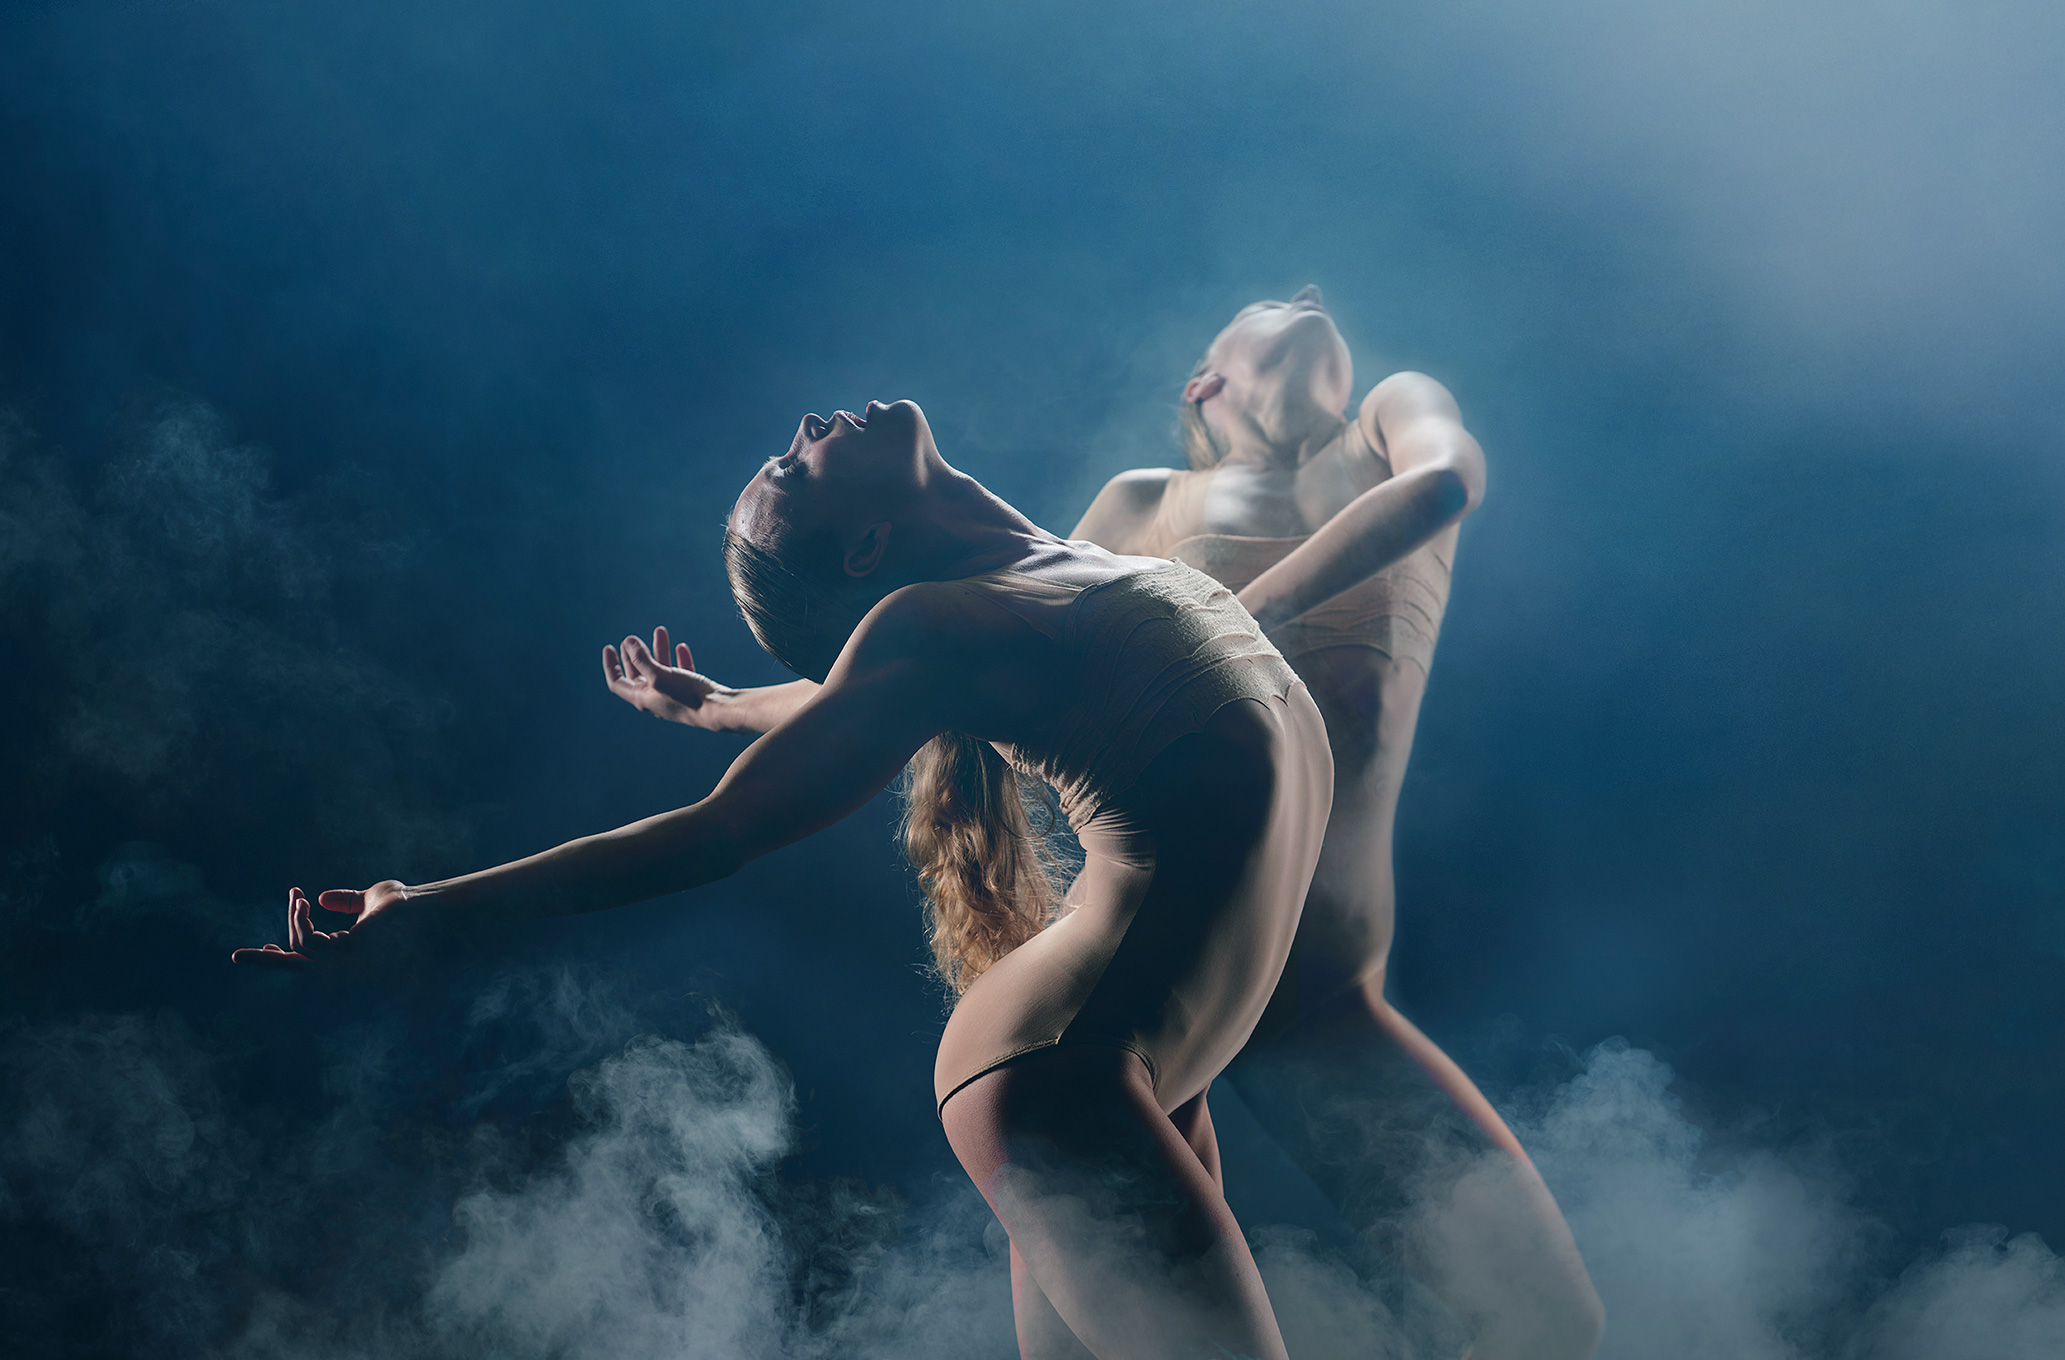 Two individuals in a dramatic dance pose surrounded by a cloud of smoke . They are illuminated from the side, casting parts of their bodies in shadow and highlighting their shapes against a dark background. The smoke lends a mysterious and surreal feel to the scene.